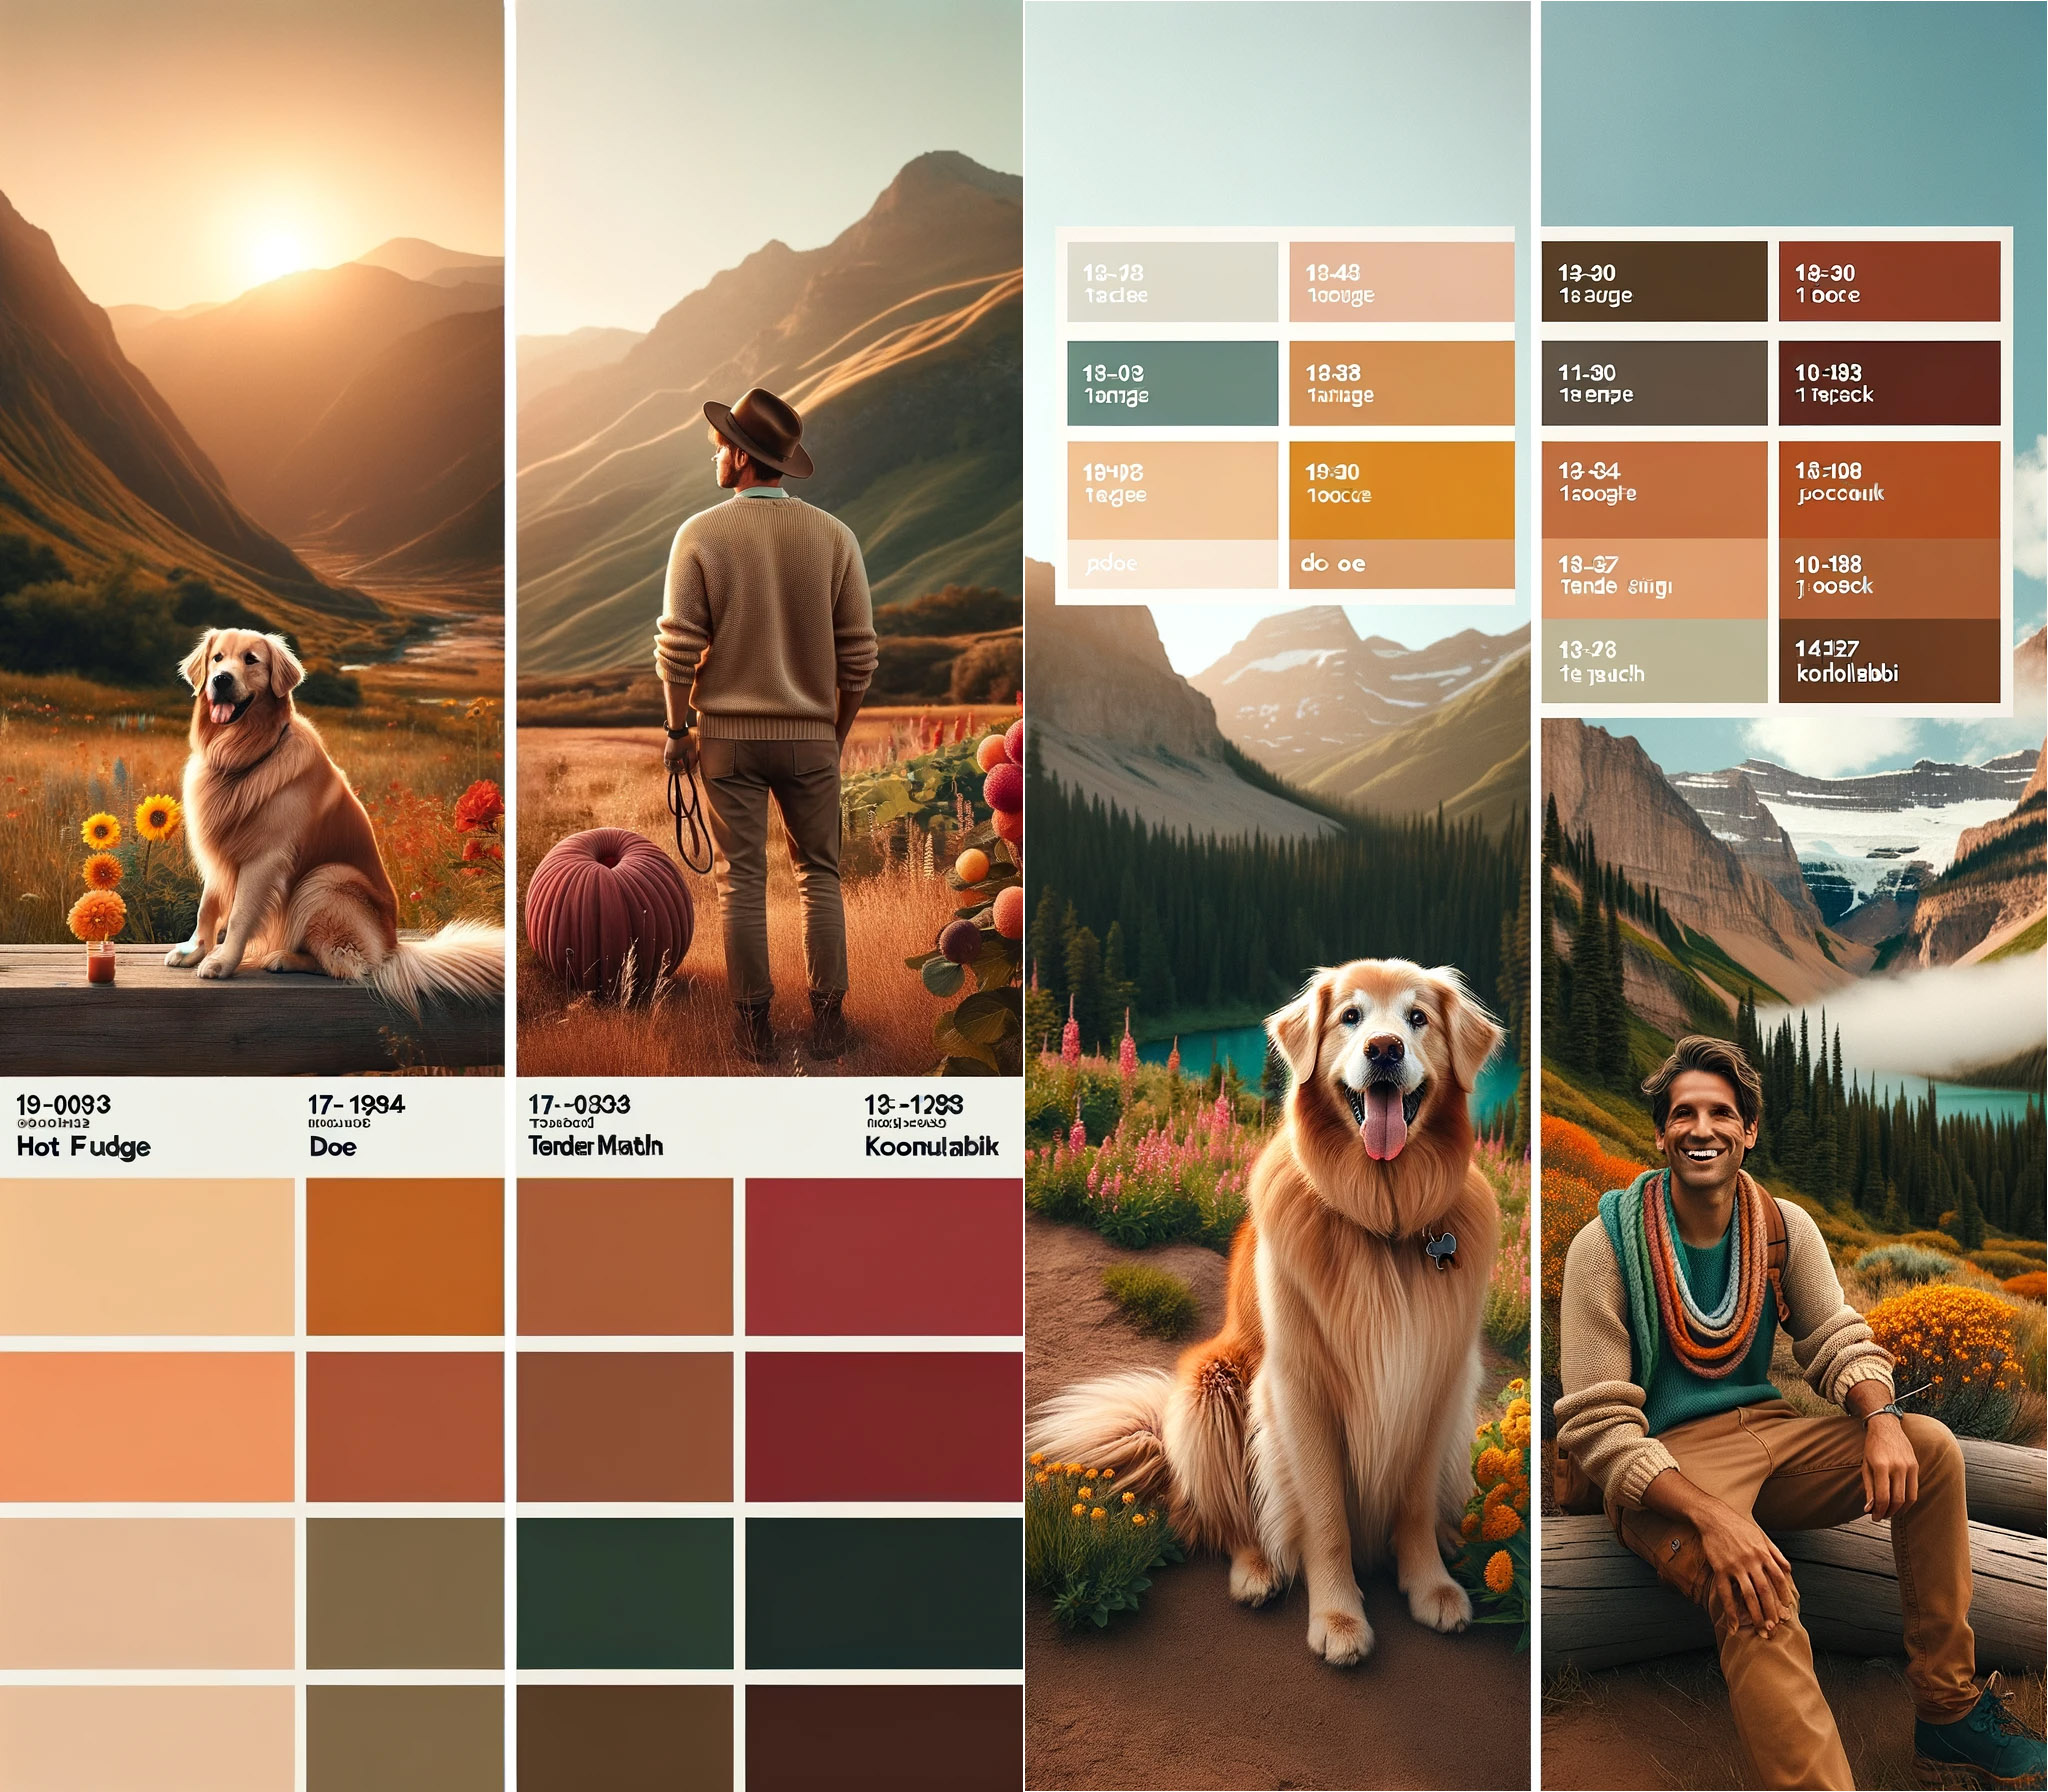 Two earthy and natural fall color palettes for a guy's photo session with his dog.